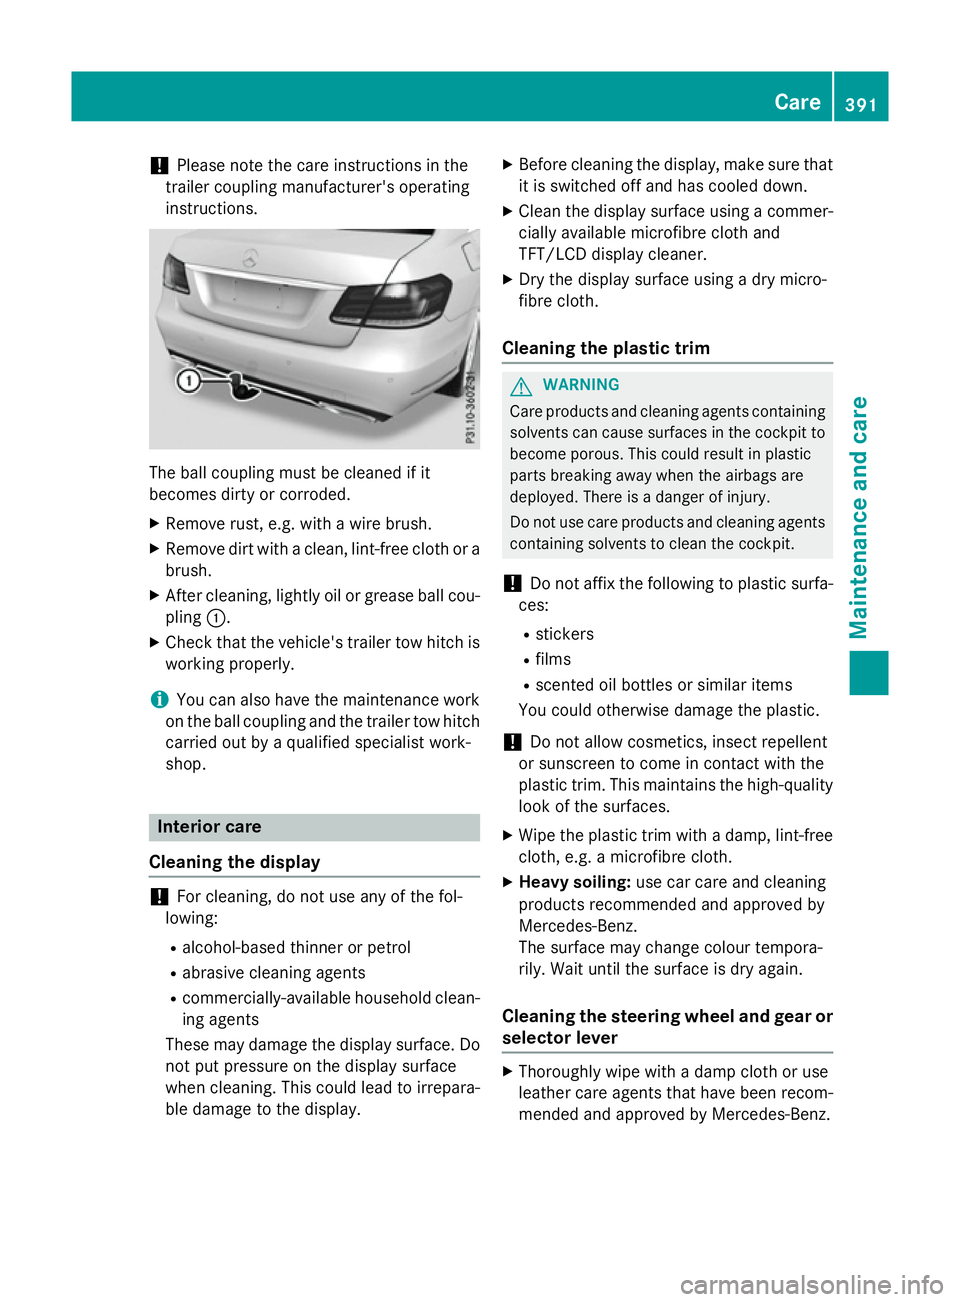 MERCEDES-BENZ E-CLASS ESTATE 2015  Owners Manual !
Please note the care instructions in the
trailer coupling manufacturer's operating
instructions. The ball coupling must be cleaned if it
becomes dirty or corroded.
X Remove rust, e.g. with awire